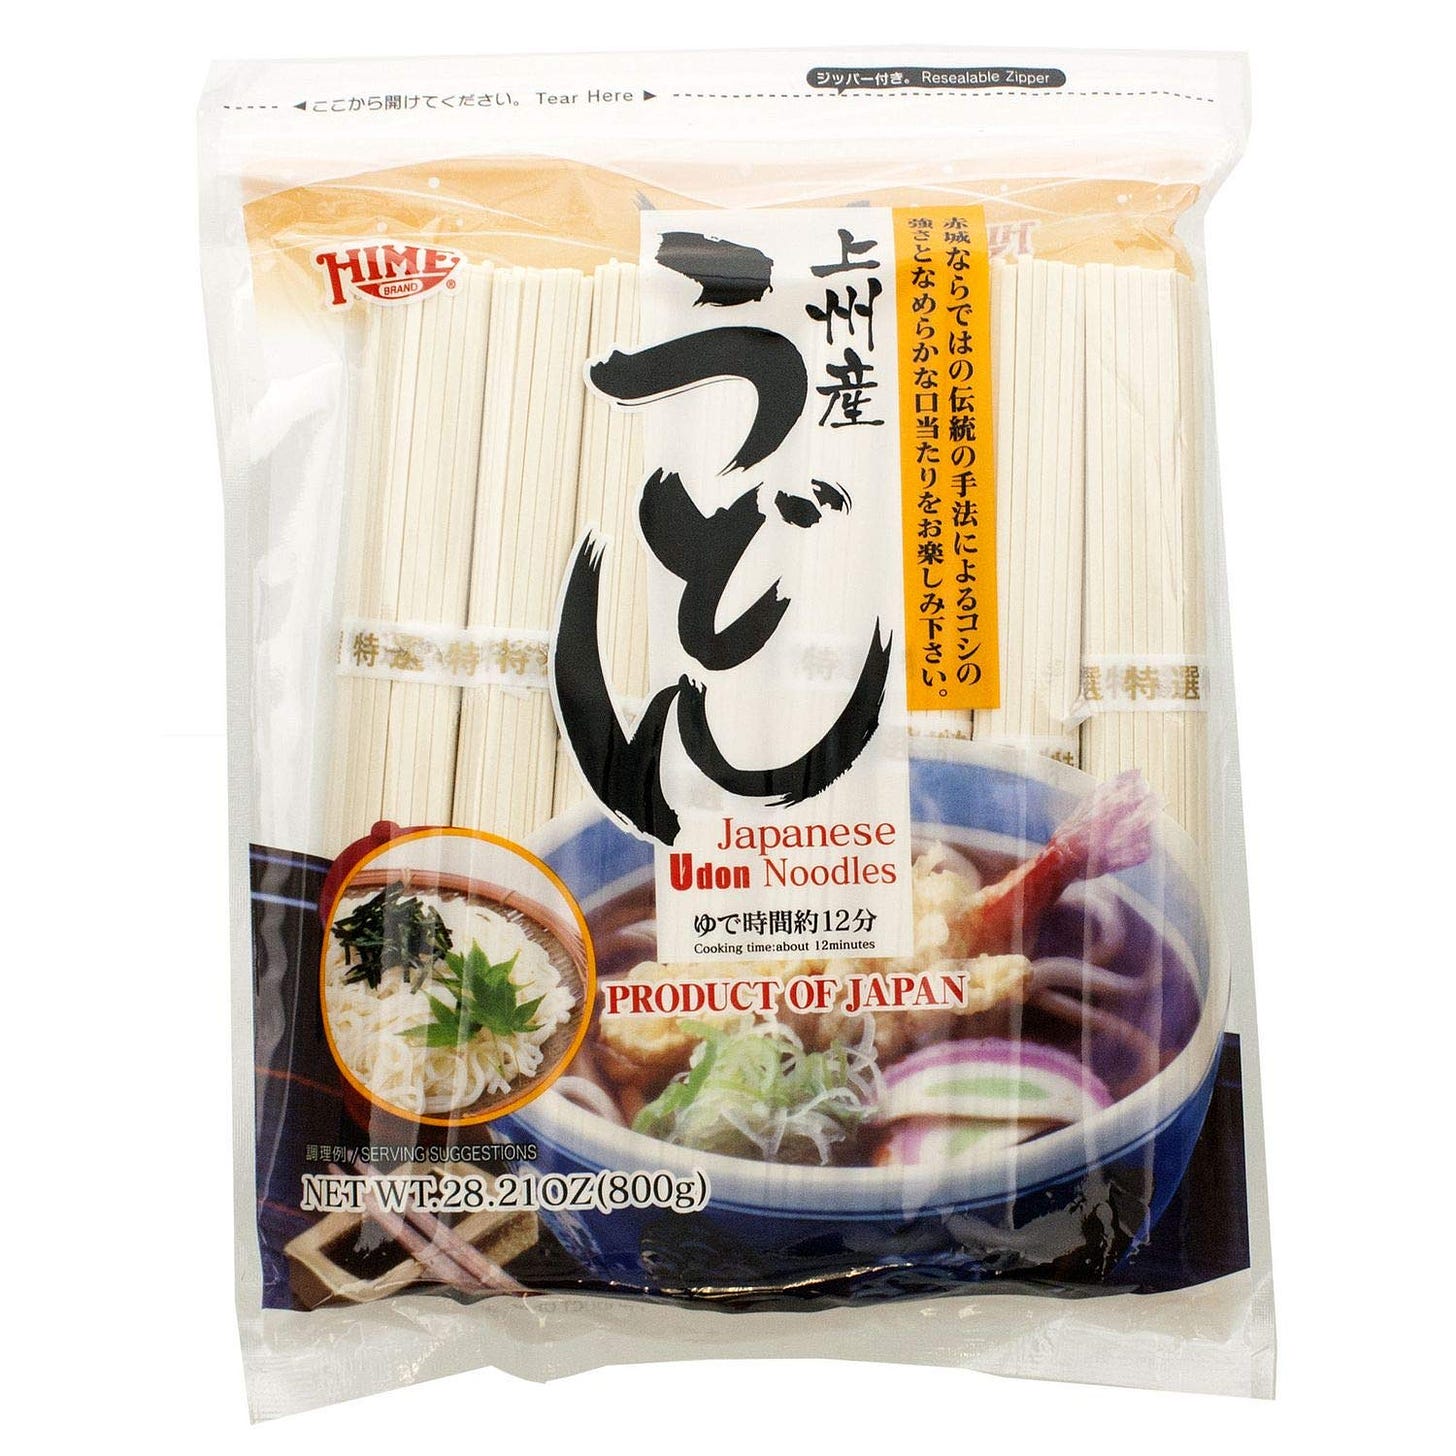 Amazon.com : Hime Dried Udon Noodles, 28.21-Ounce : Grocery &amp; Gourmet Food